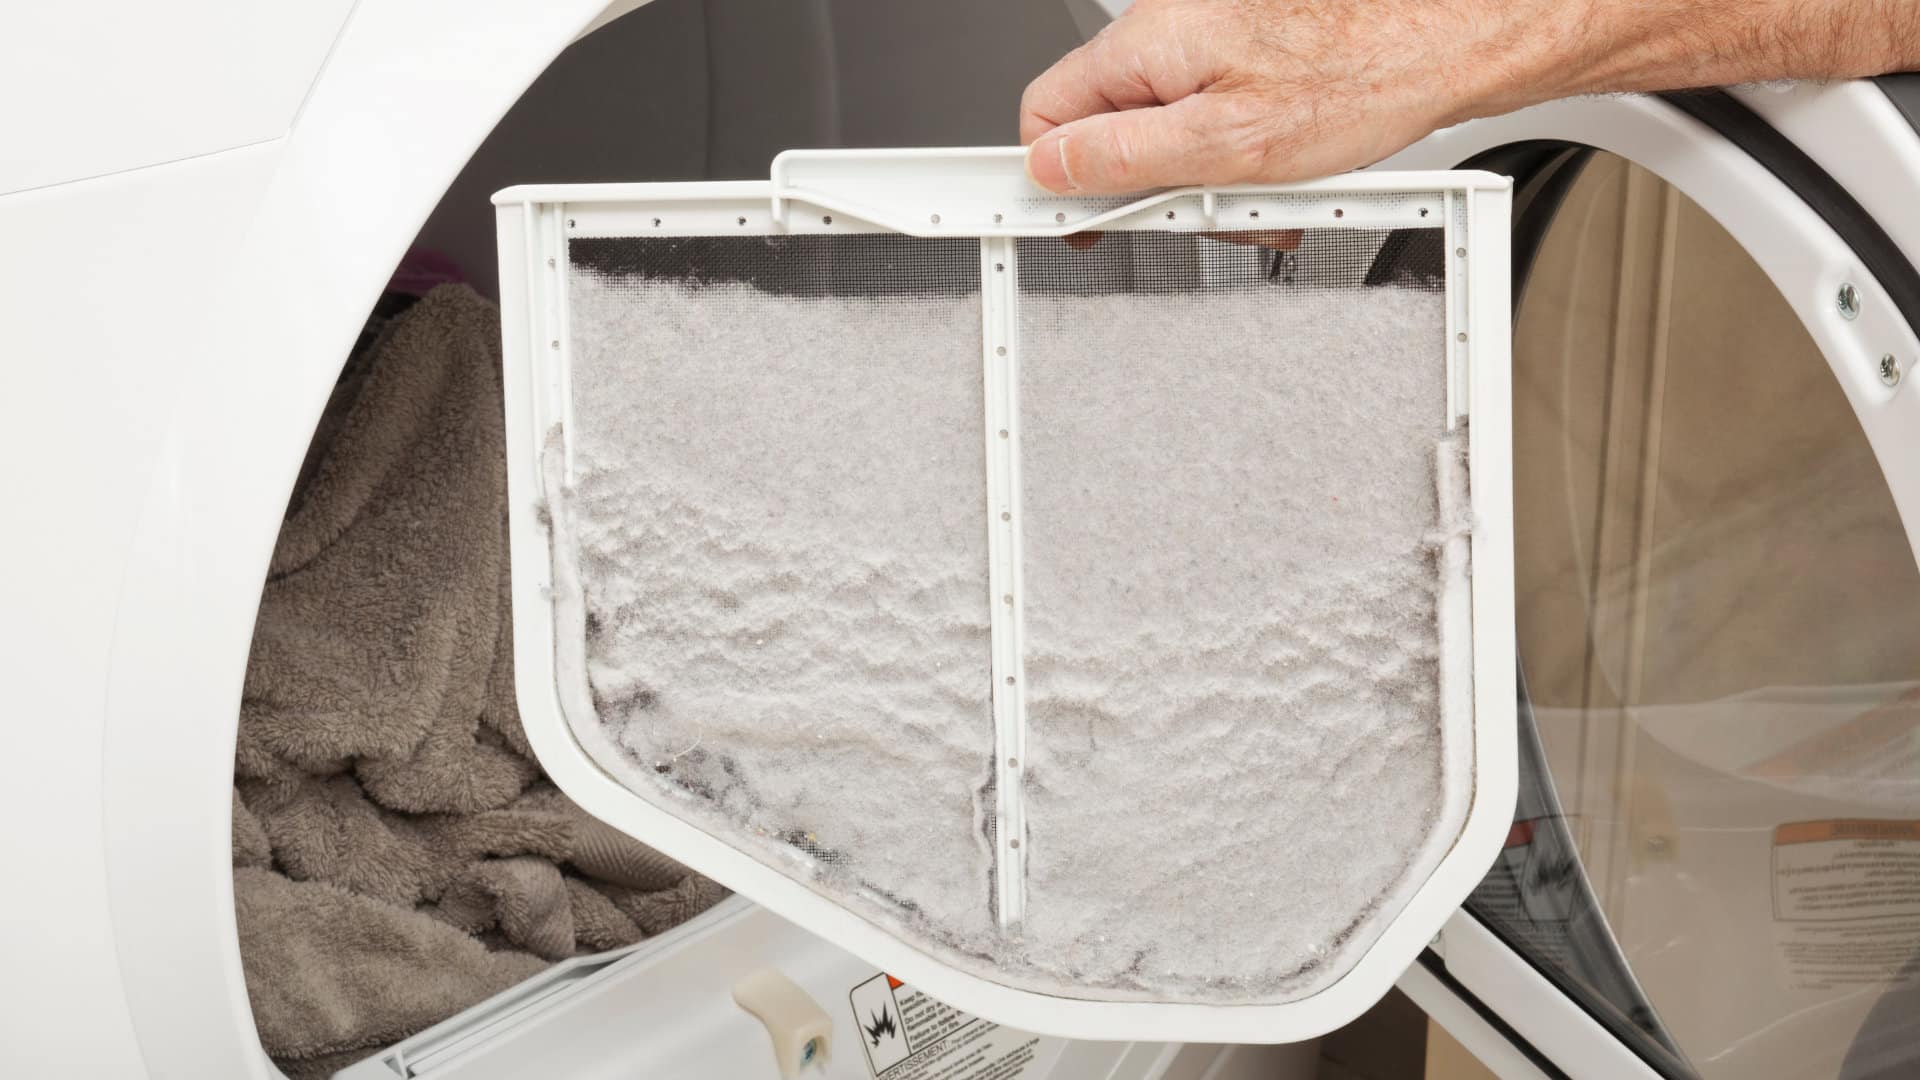 Featured image for “The Importance of Regularly Cleaning Your Dryer Lint Trap”